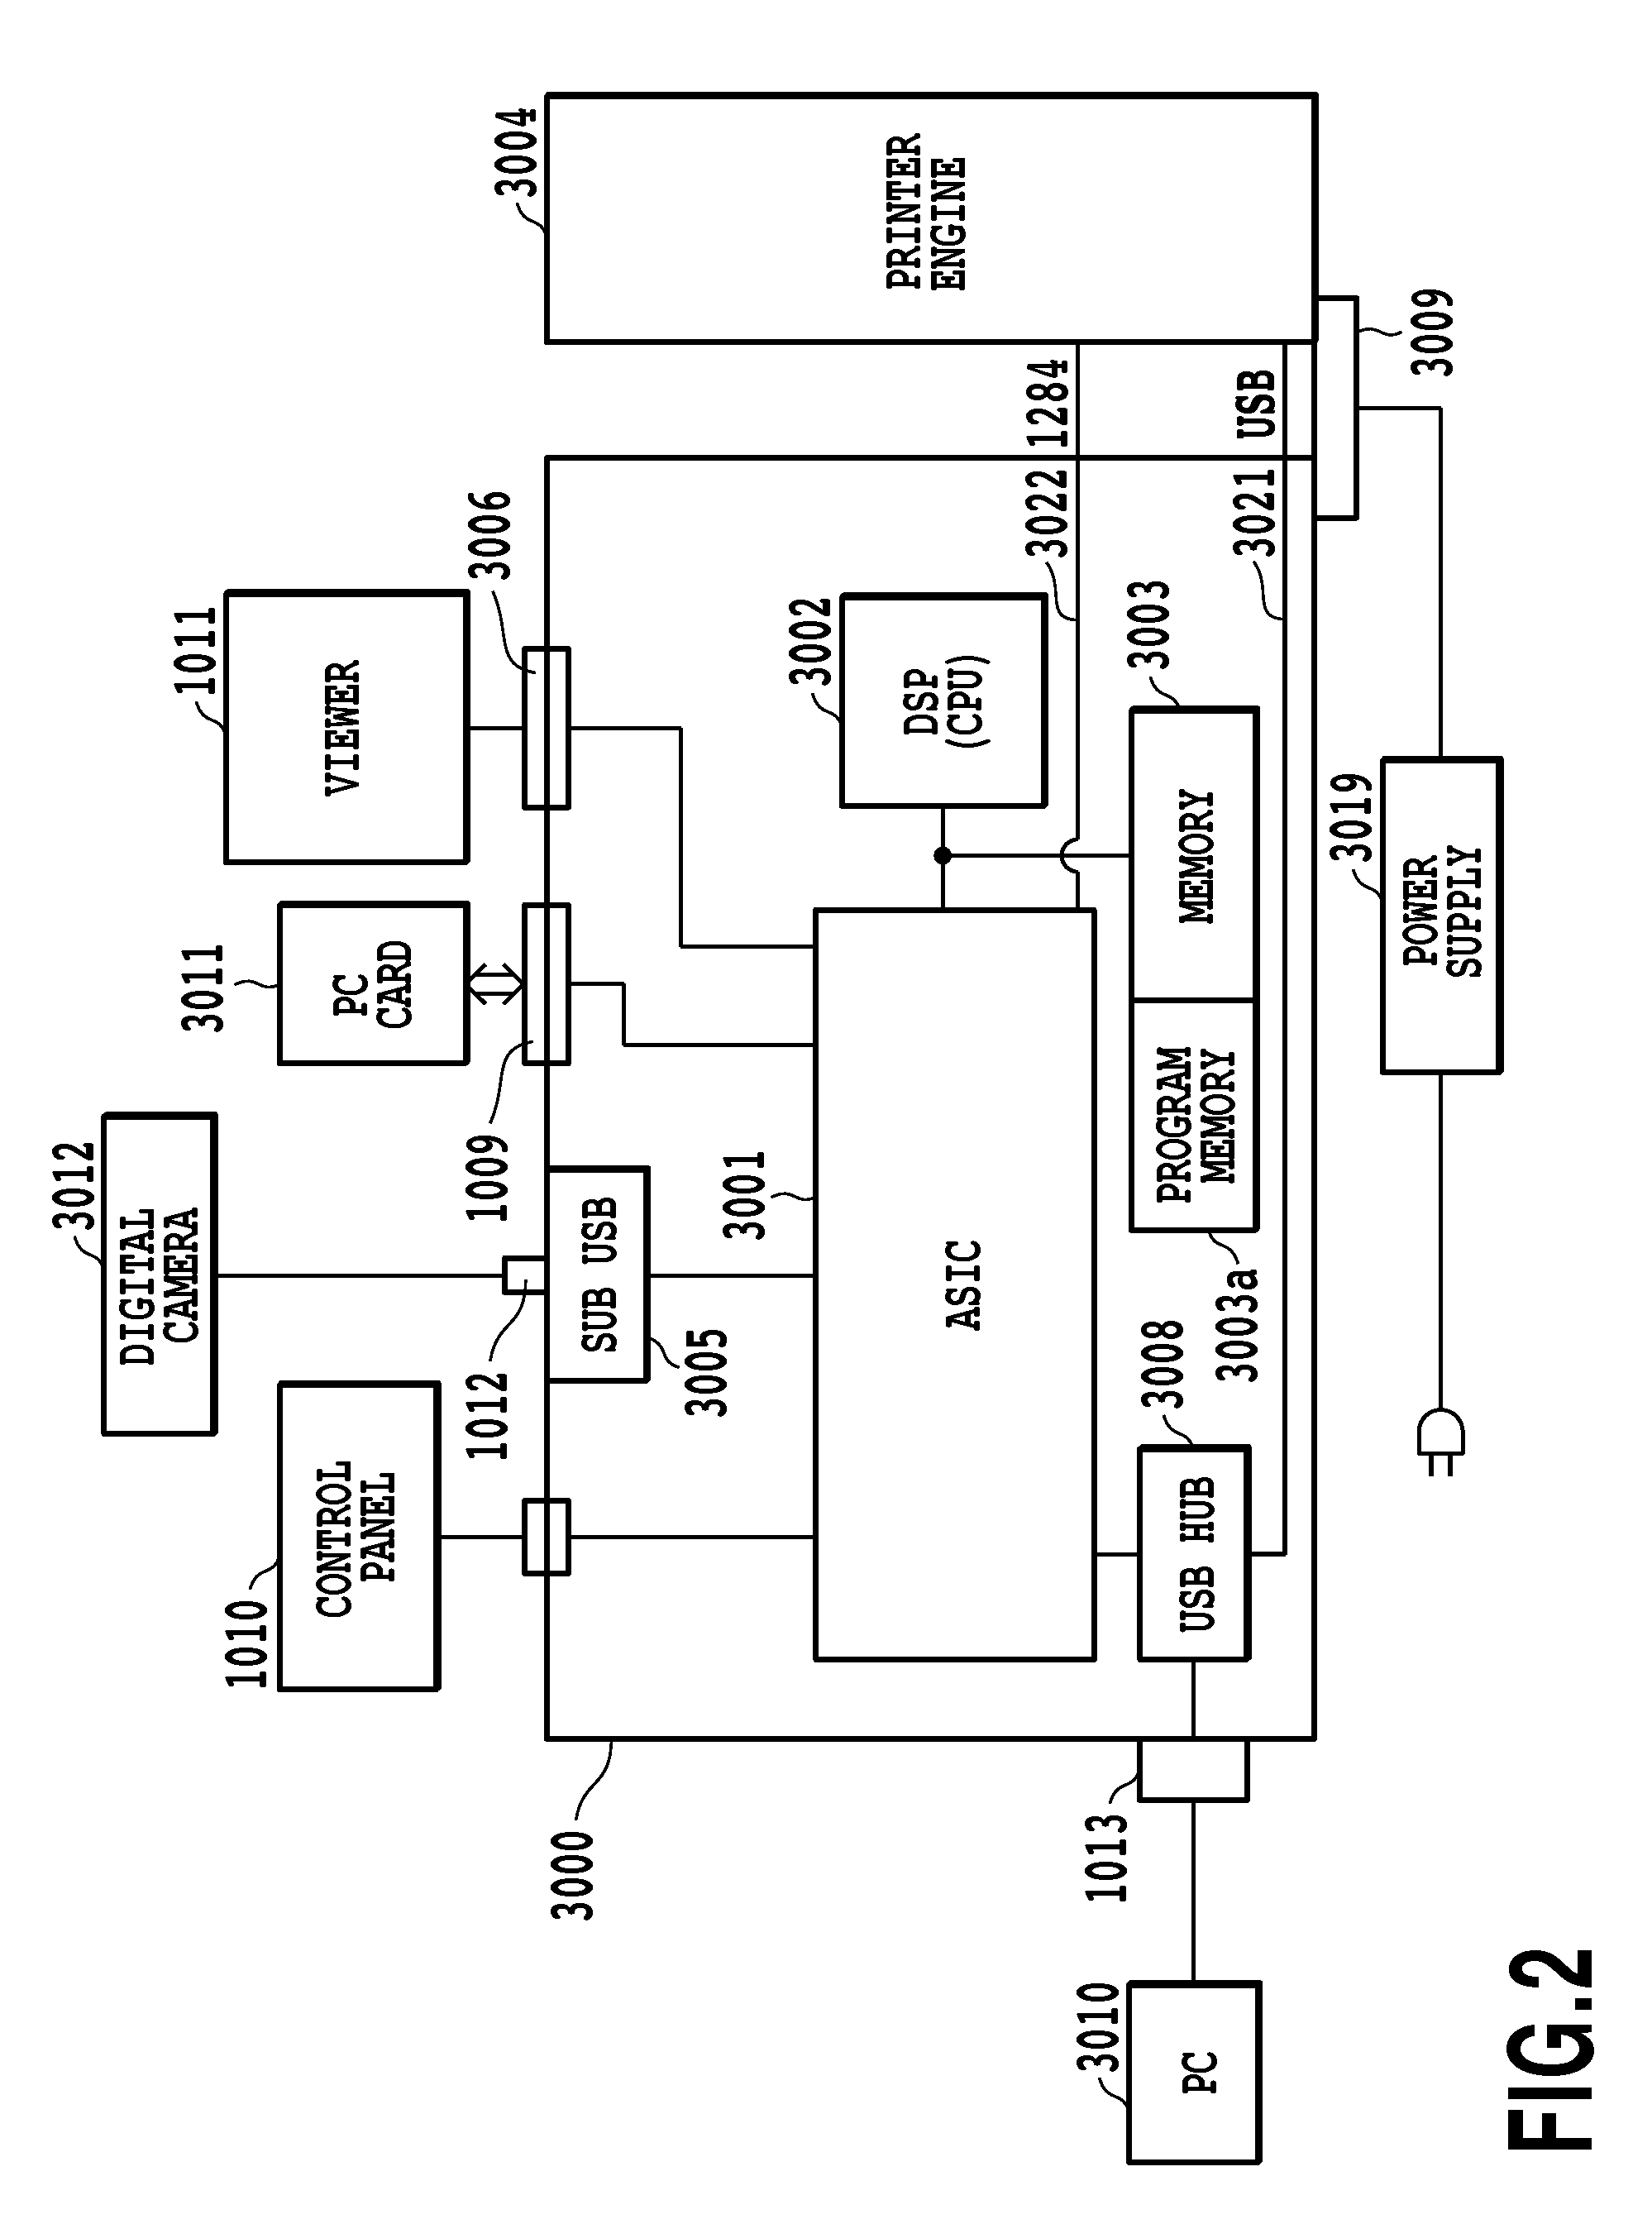 Image processor and image processing method generating first and second multi-value density data or performing quantization based on an image characteristic